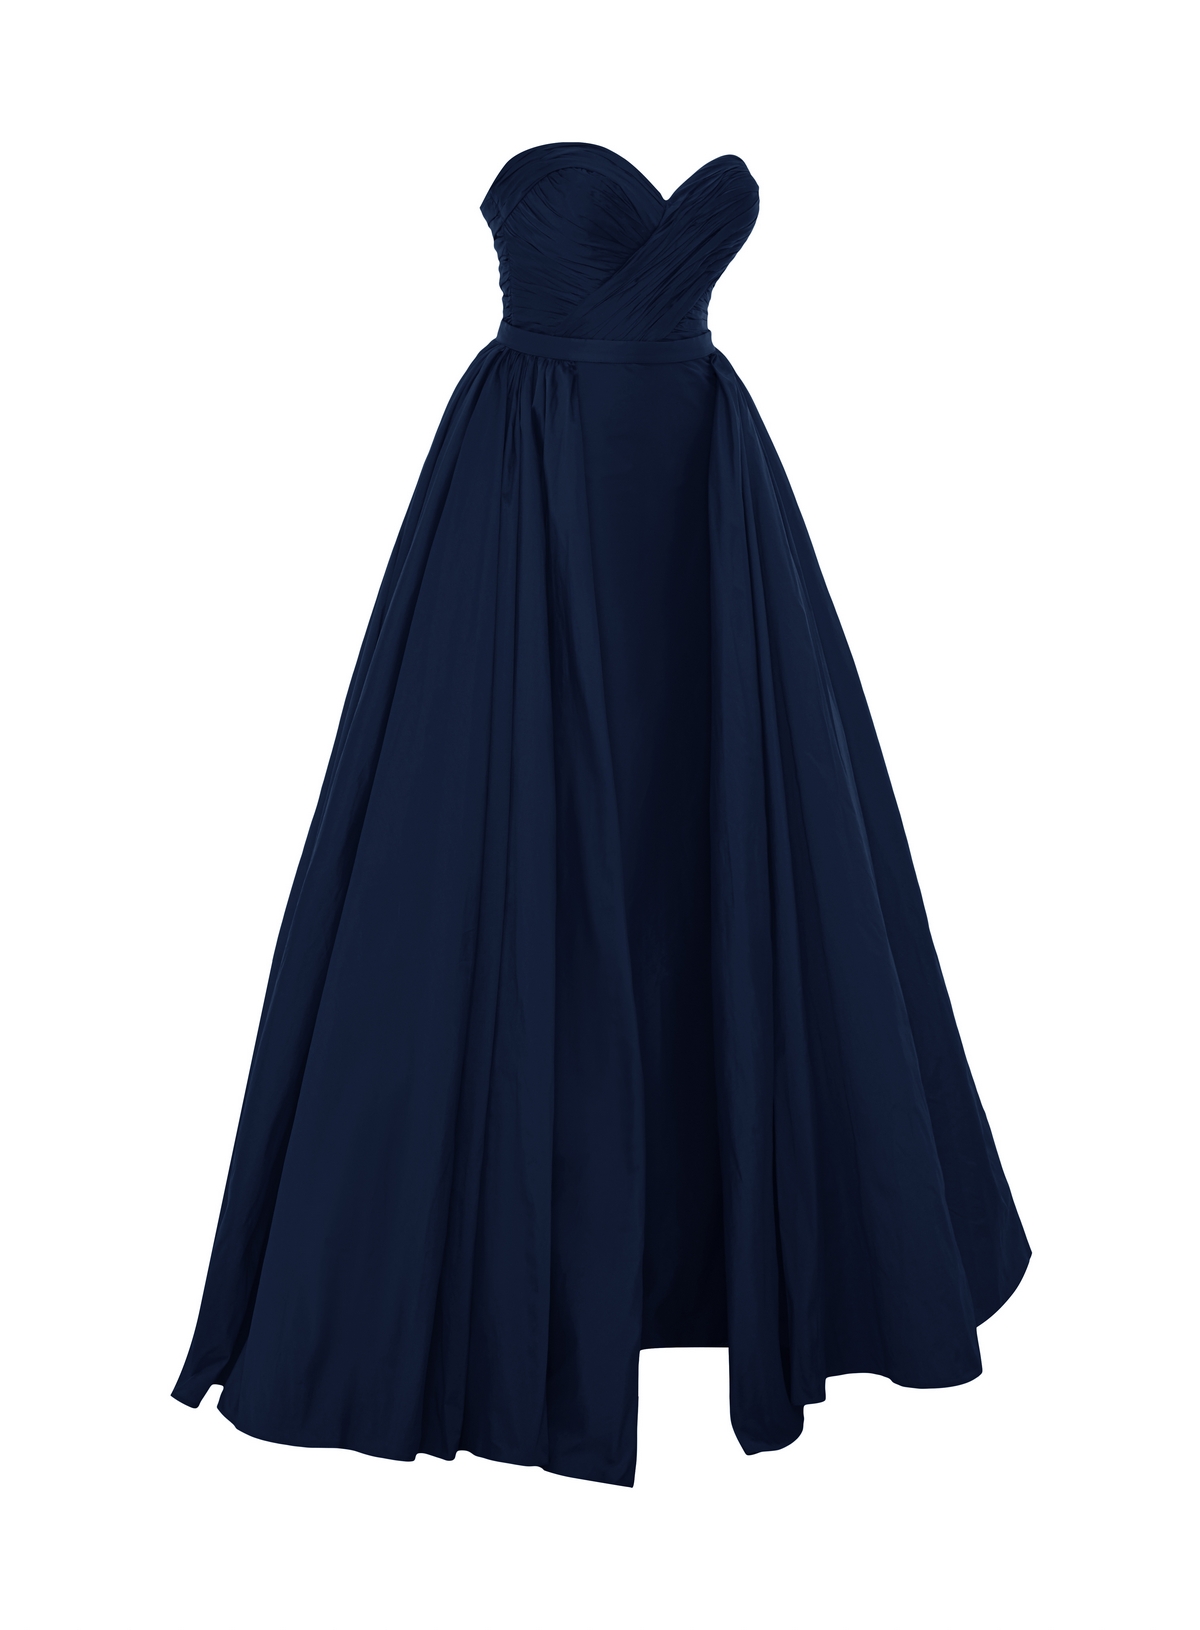 Picture of GLORIA NAVY DRESS